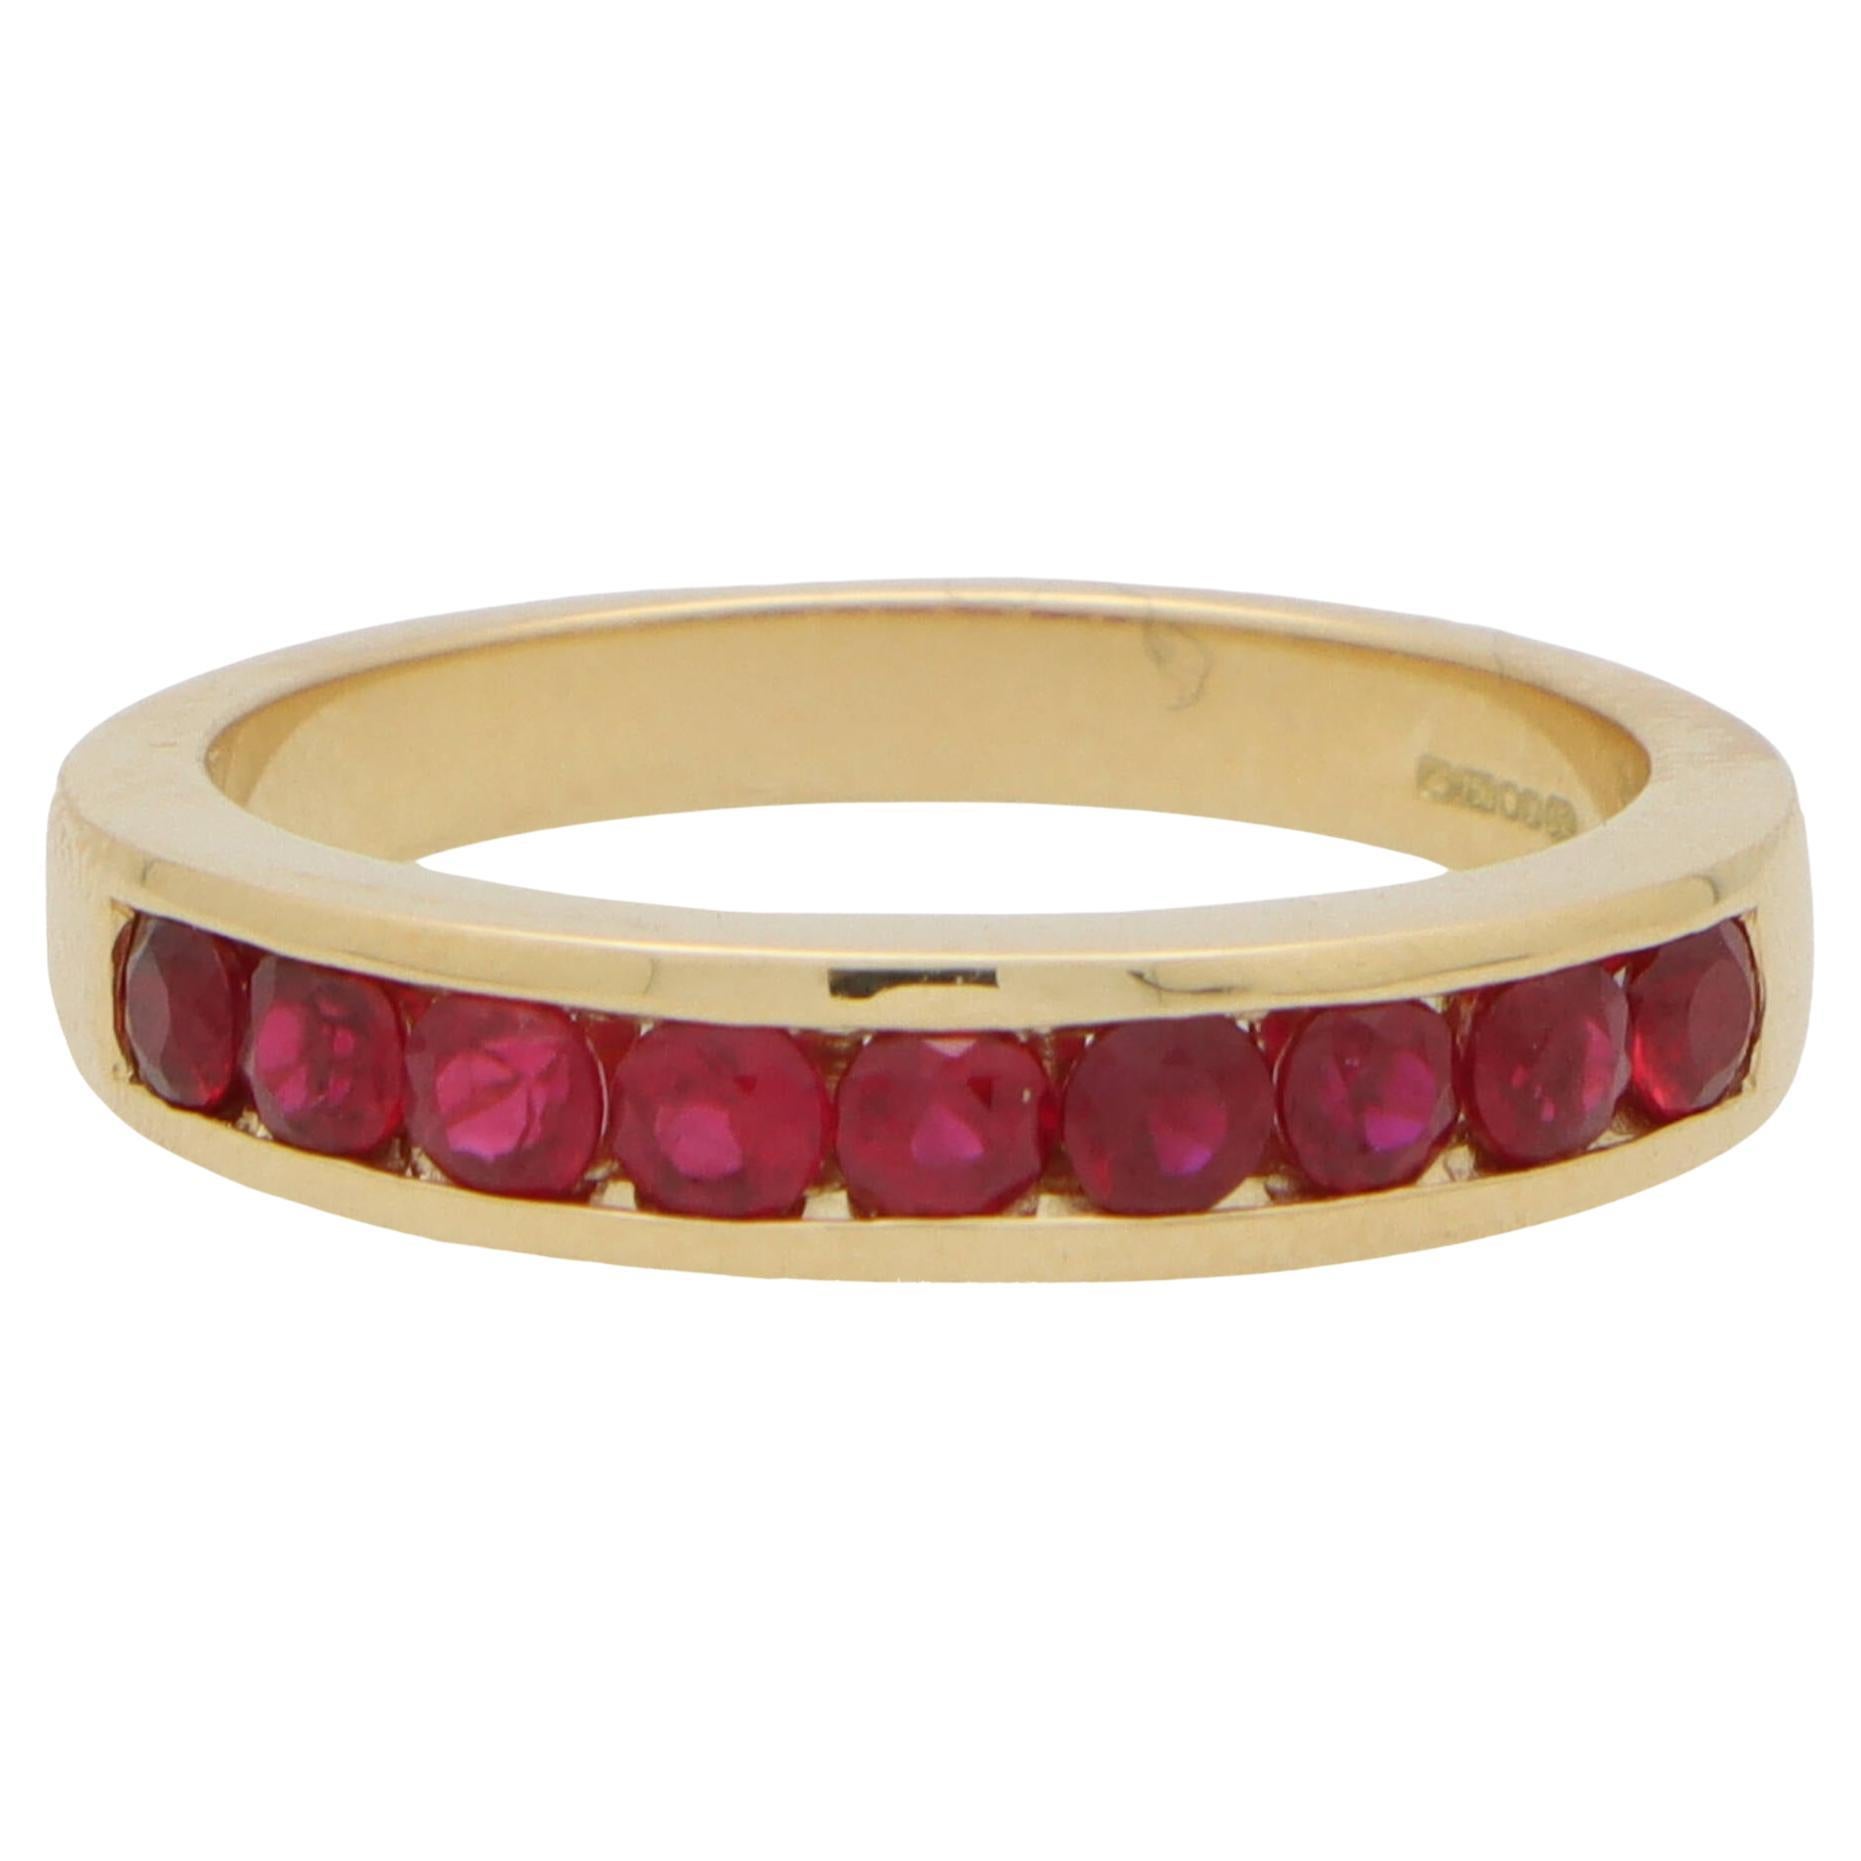 Ruby Channel Set Half Eternity Ring in 18k Yellow Gold